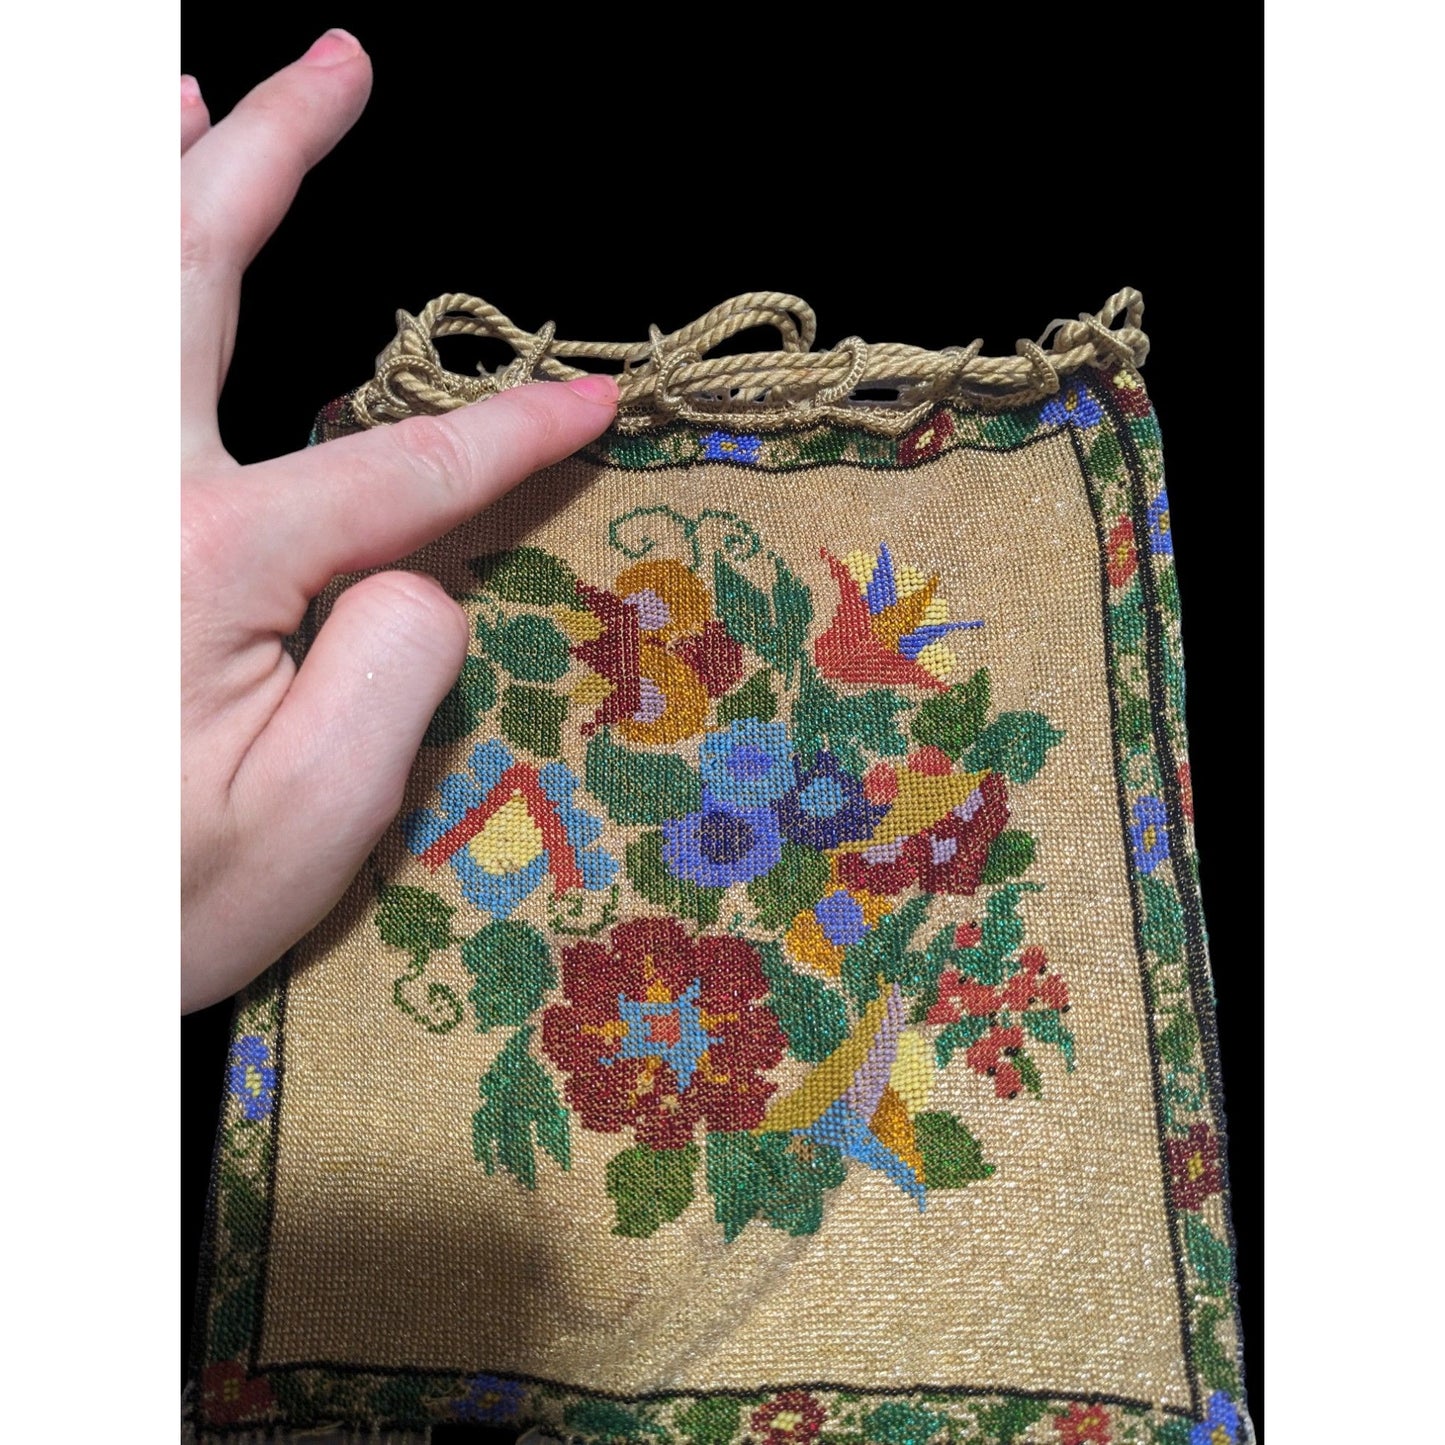 Antique Victorian Beaded Drawstring Floral Reticule